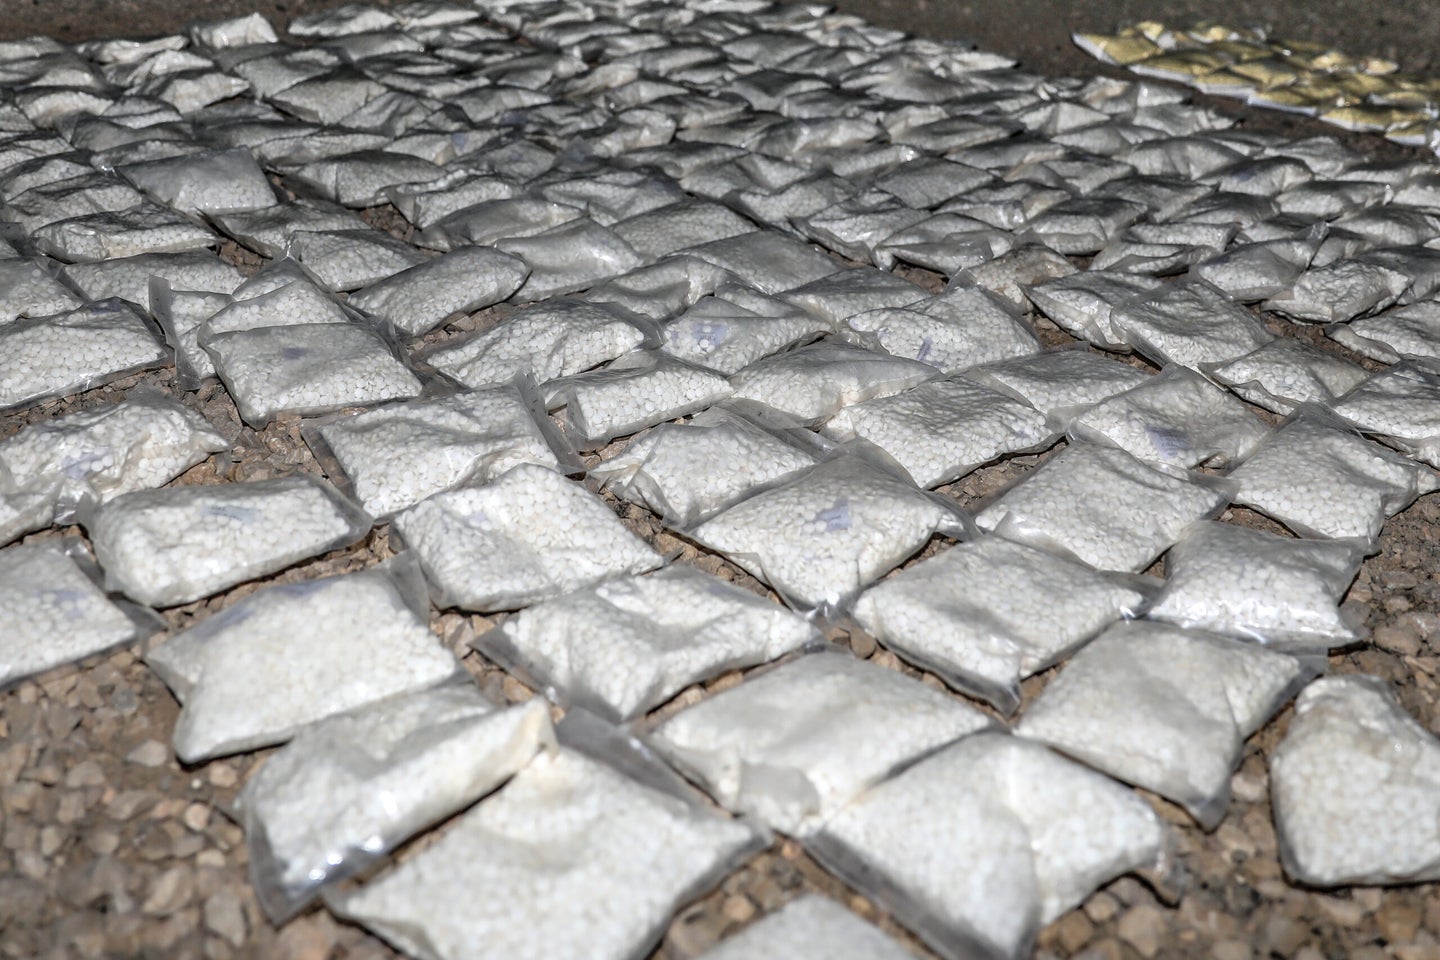 Over 127 plastic bags filled with an addictive drug called Captagon lie ready for destruction after being seized by U.S. and Coalition partners in Southern Syria, May 31, 2018. Reports have surfaced that captagon was taken widely by Hamas fighters to fuel the October 7 murder spree in Israel. Army photo by Staff Sgt. Christopher Brown.